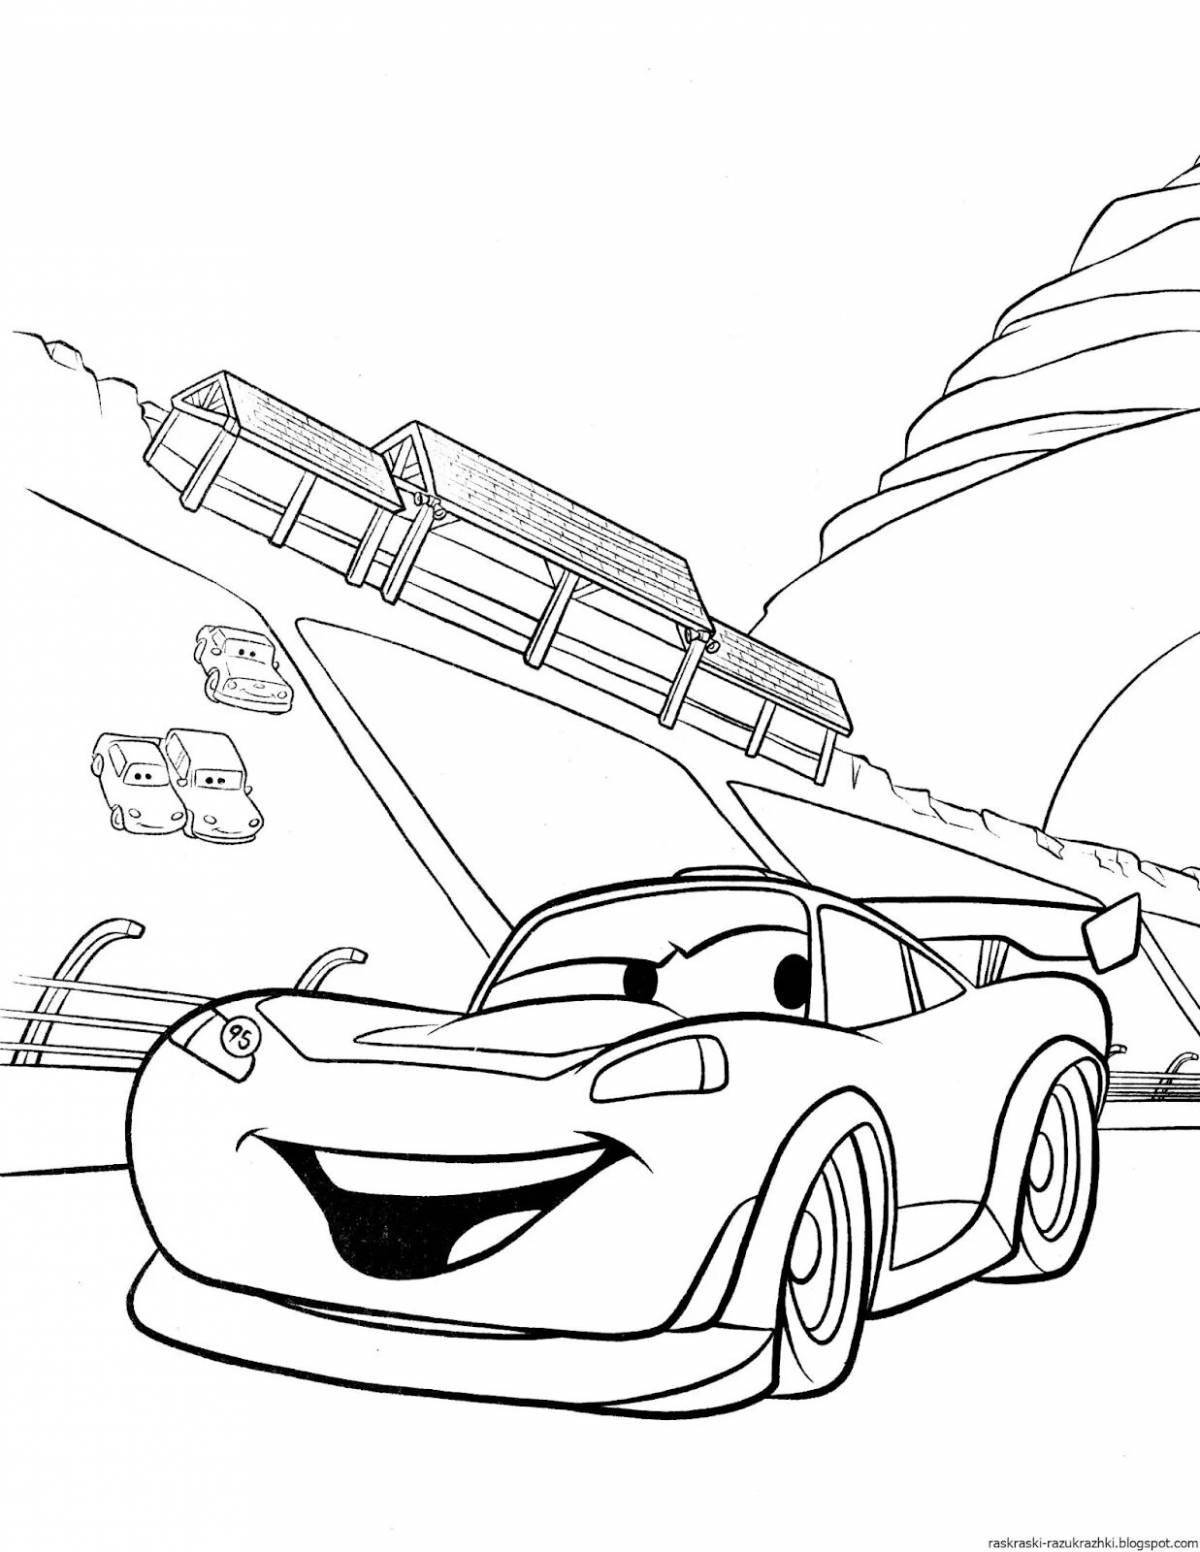 Fearless makvin coloring pages for boys